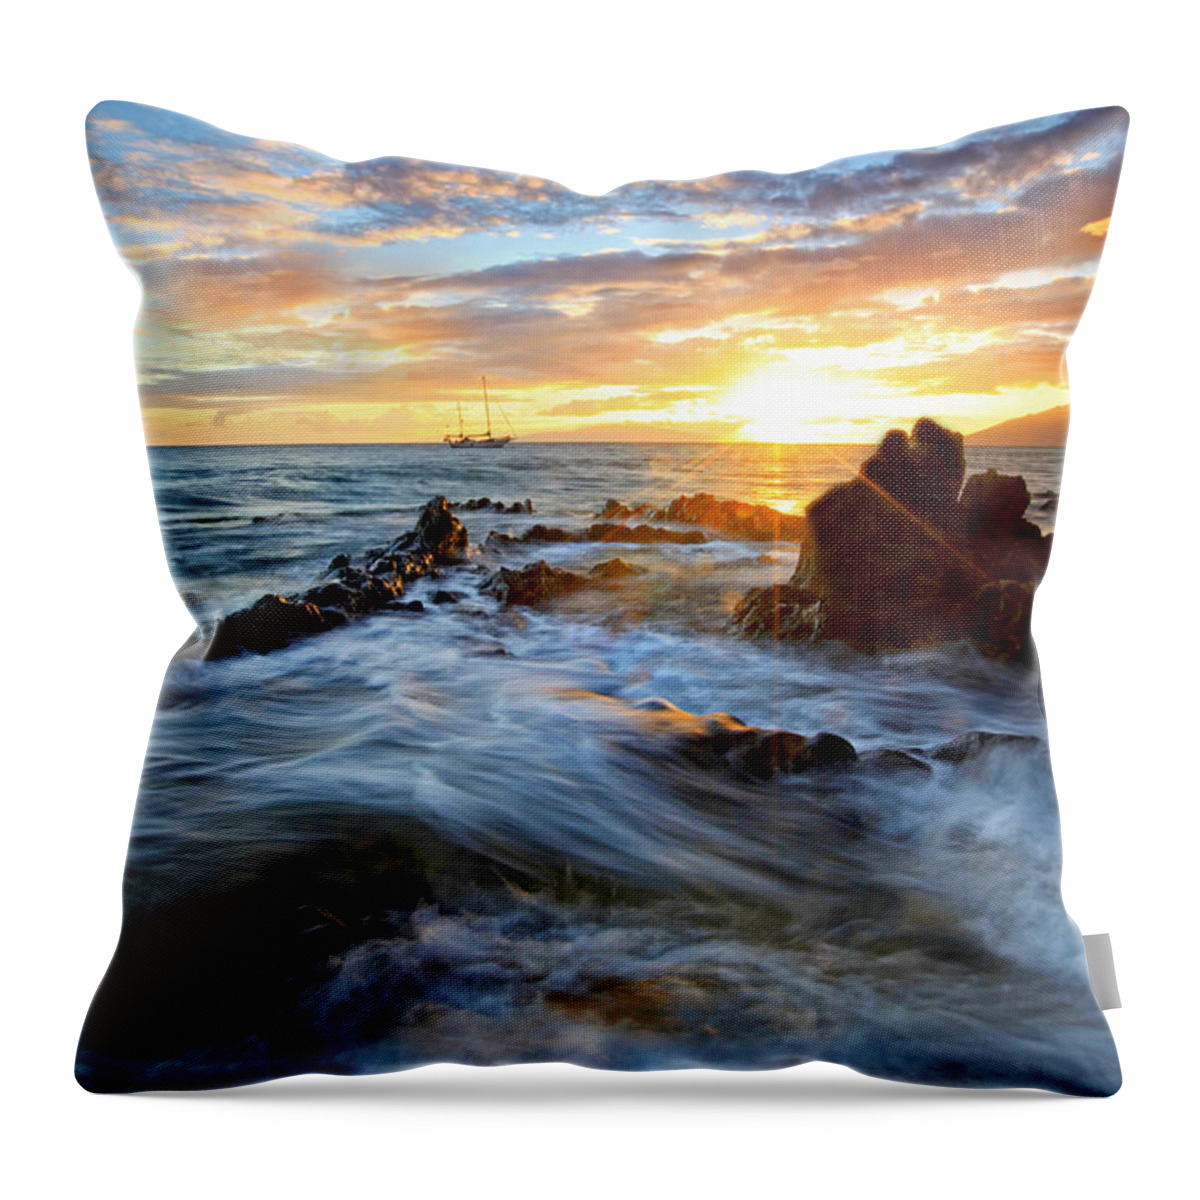 Kihei Maui Hawaii Charlie Young Beach Seascape Lava Ocean Clouds Ship Sunset Throw Pillow featuring the photograph Endless Ocean by James Roemmling